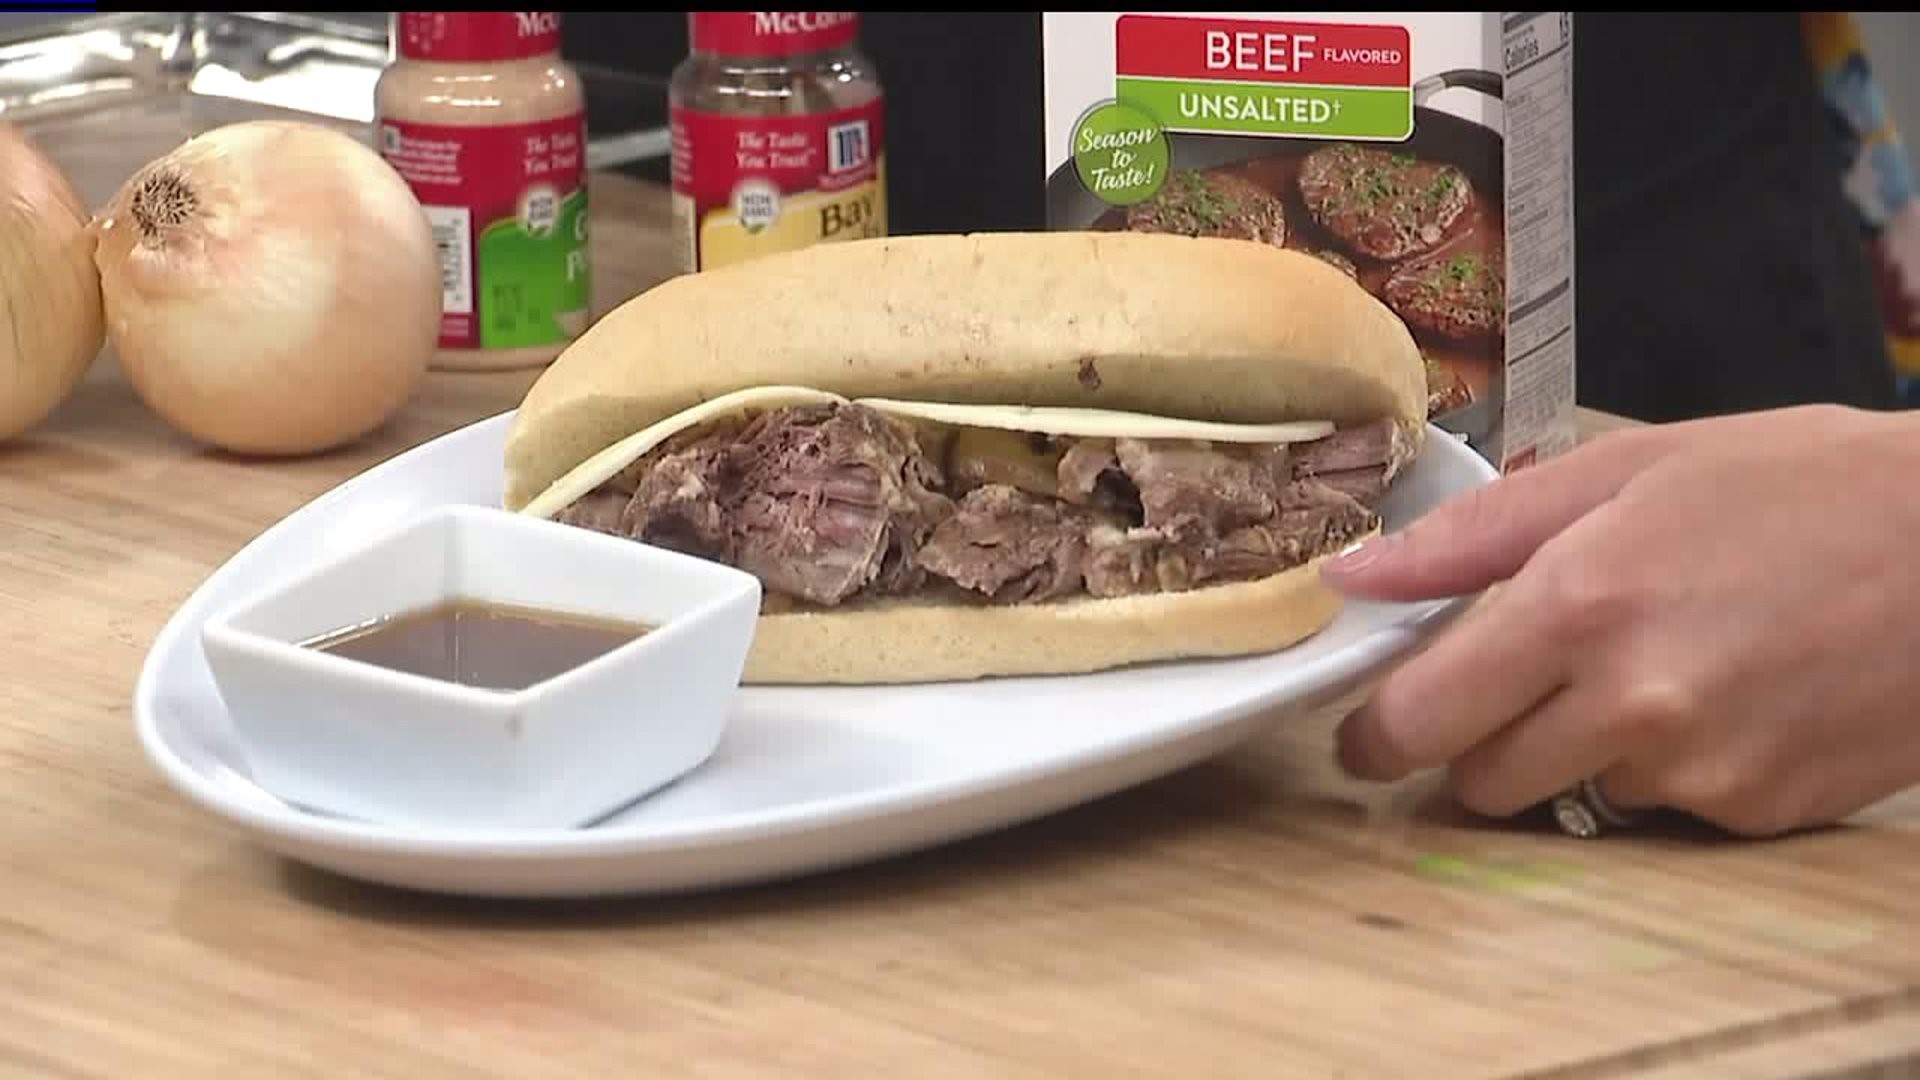 The Fast Way to Make a French Dip